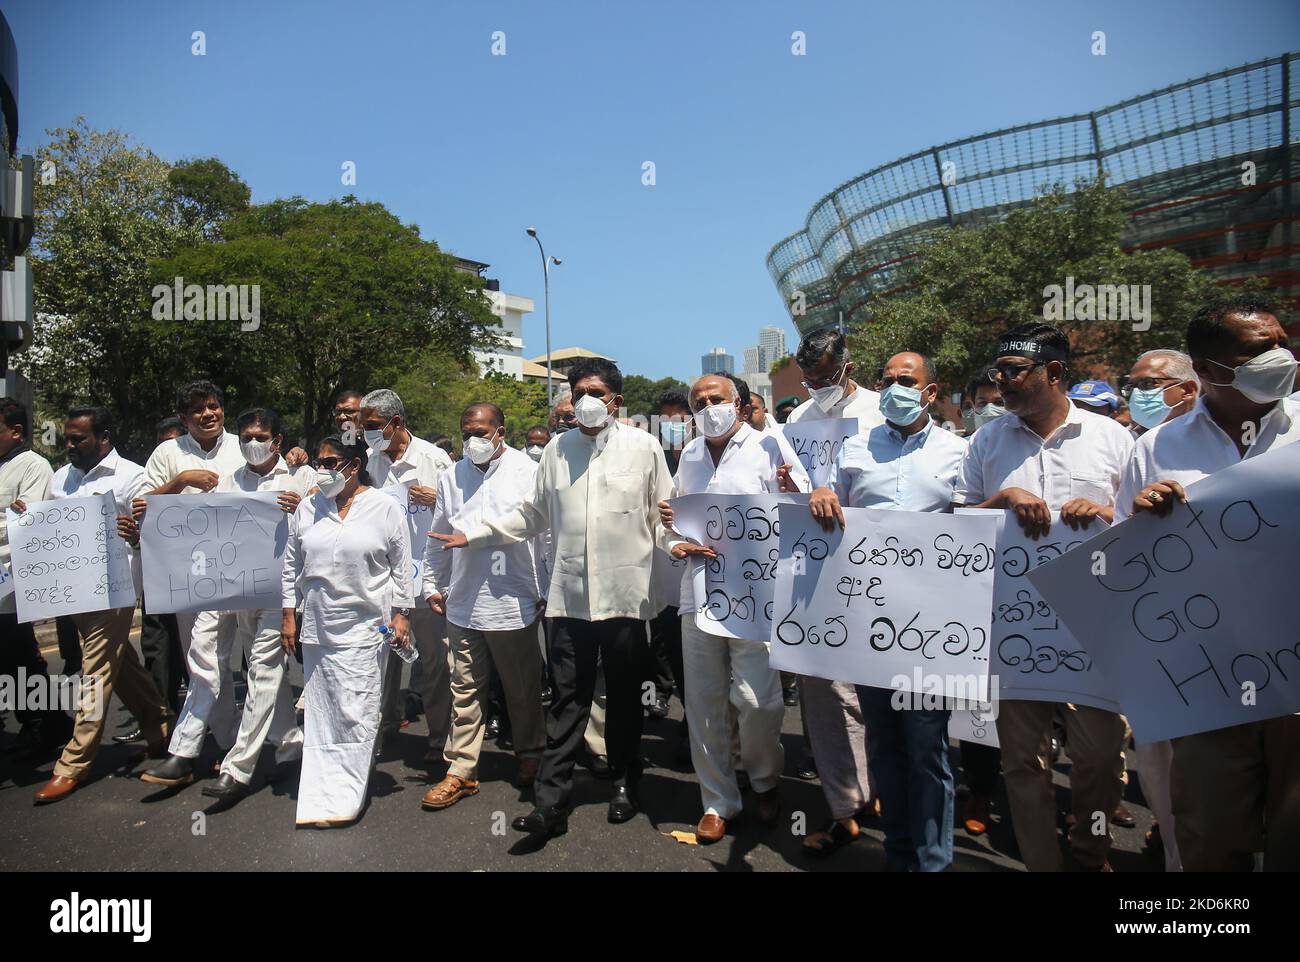 Sri Lanka's main opposition leader Sajith Premadasa (C) and other members of the Samagi Jana Balawewa staged a protest march in Colombo on April 3, 2022, against the imposition of a nationwide curfew. Protests against the island's deepening economic crisis were blocked by security forces. (Photo by Pradeep Dambarage/NurPhoto) Stock Photo